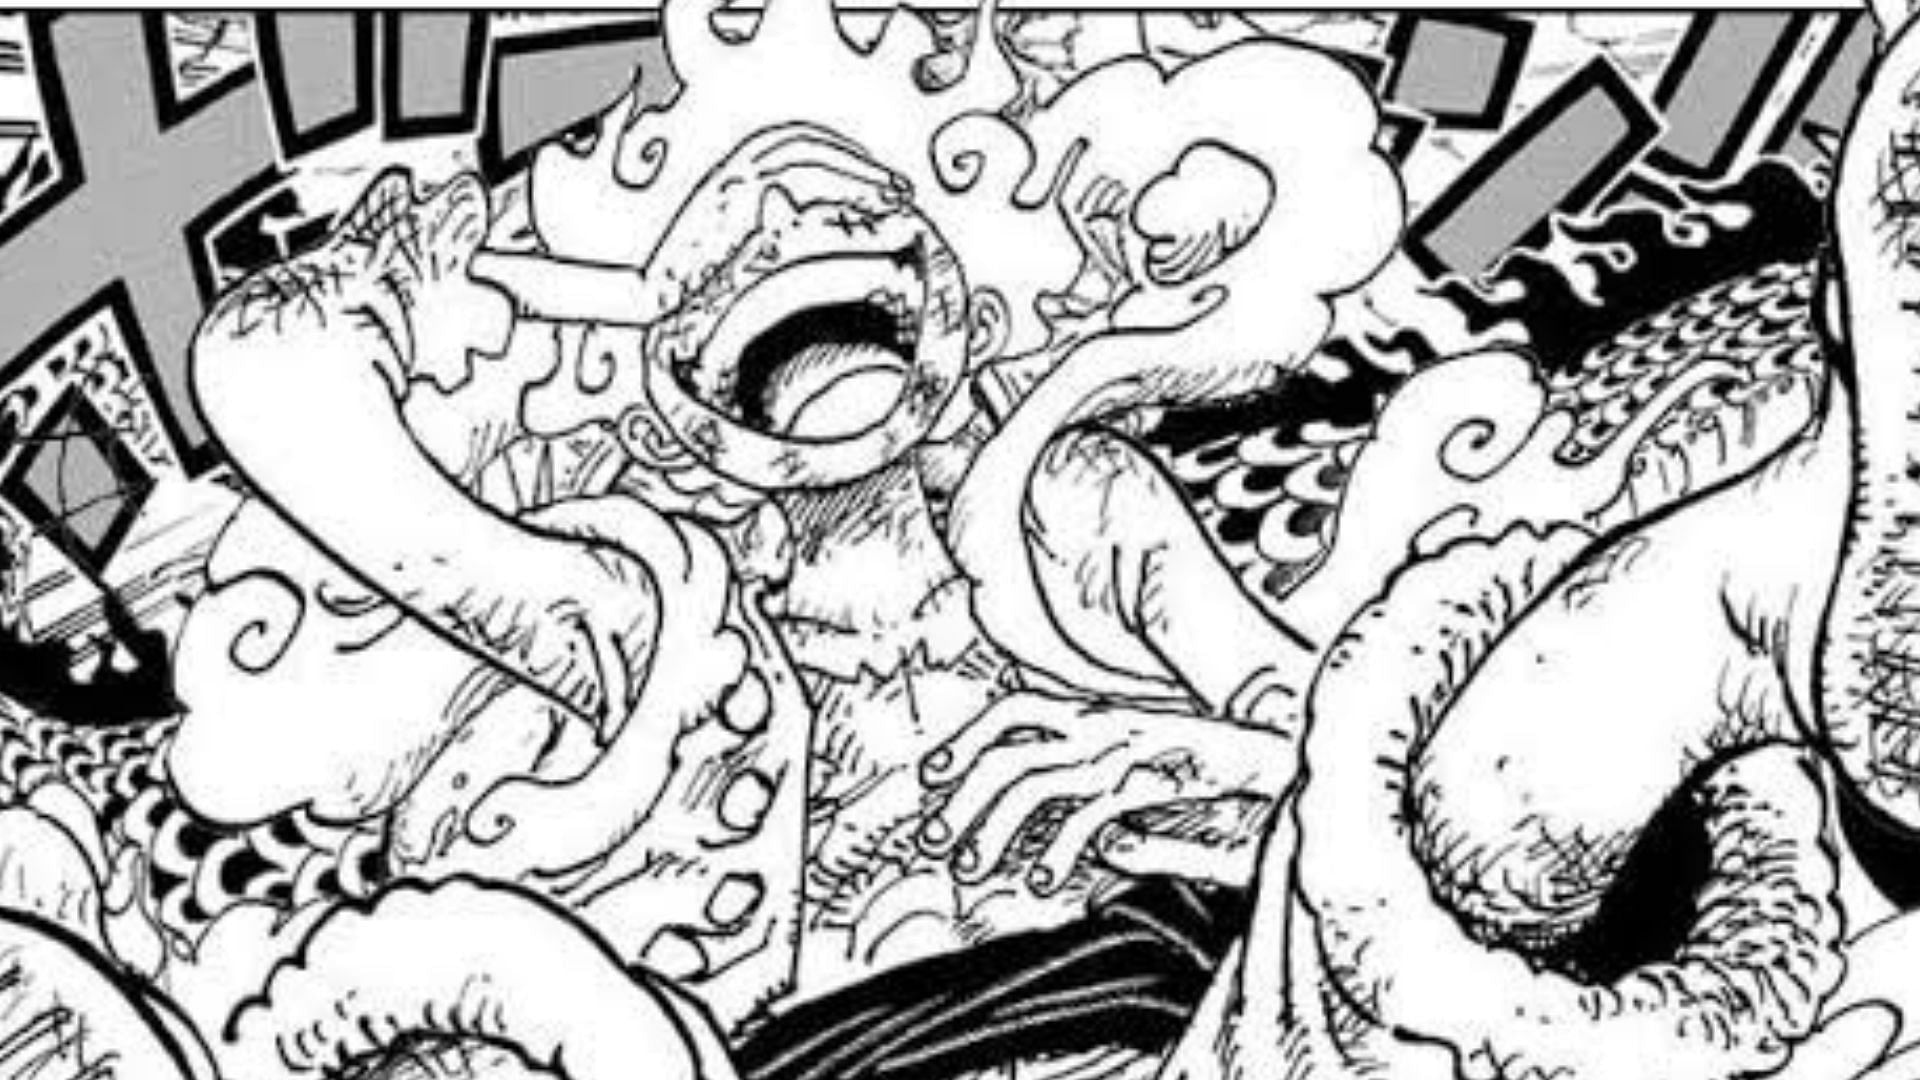 Twitter reacts to One Piece Chapter 1044 raws